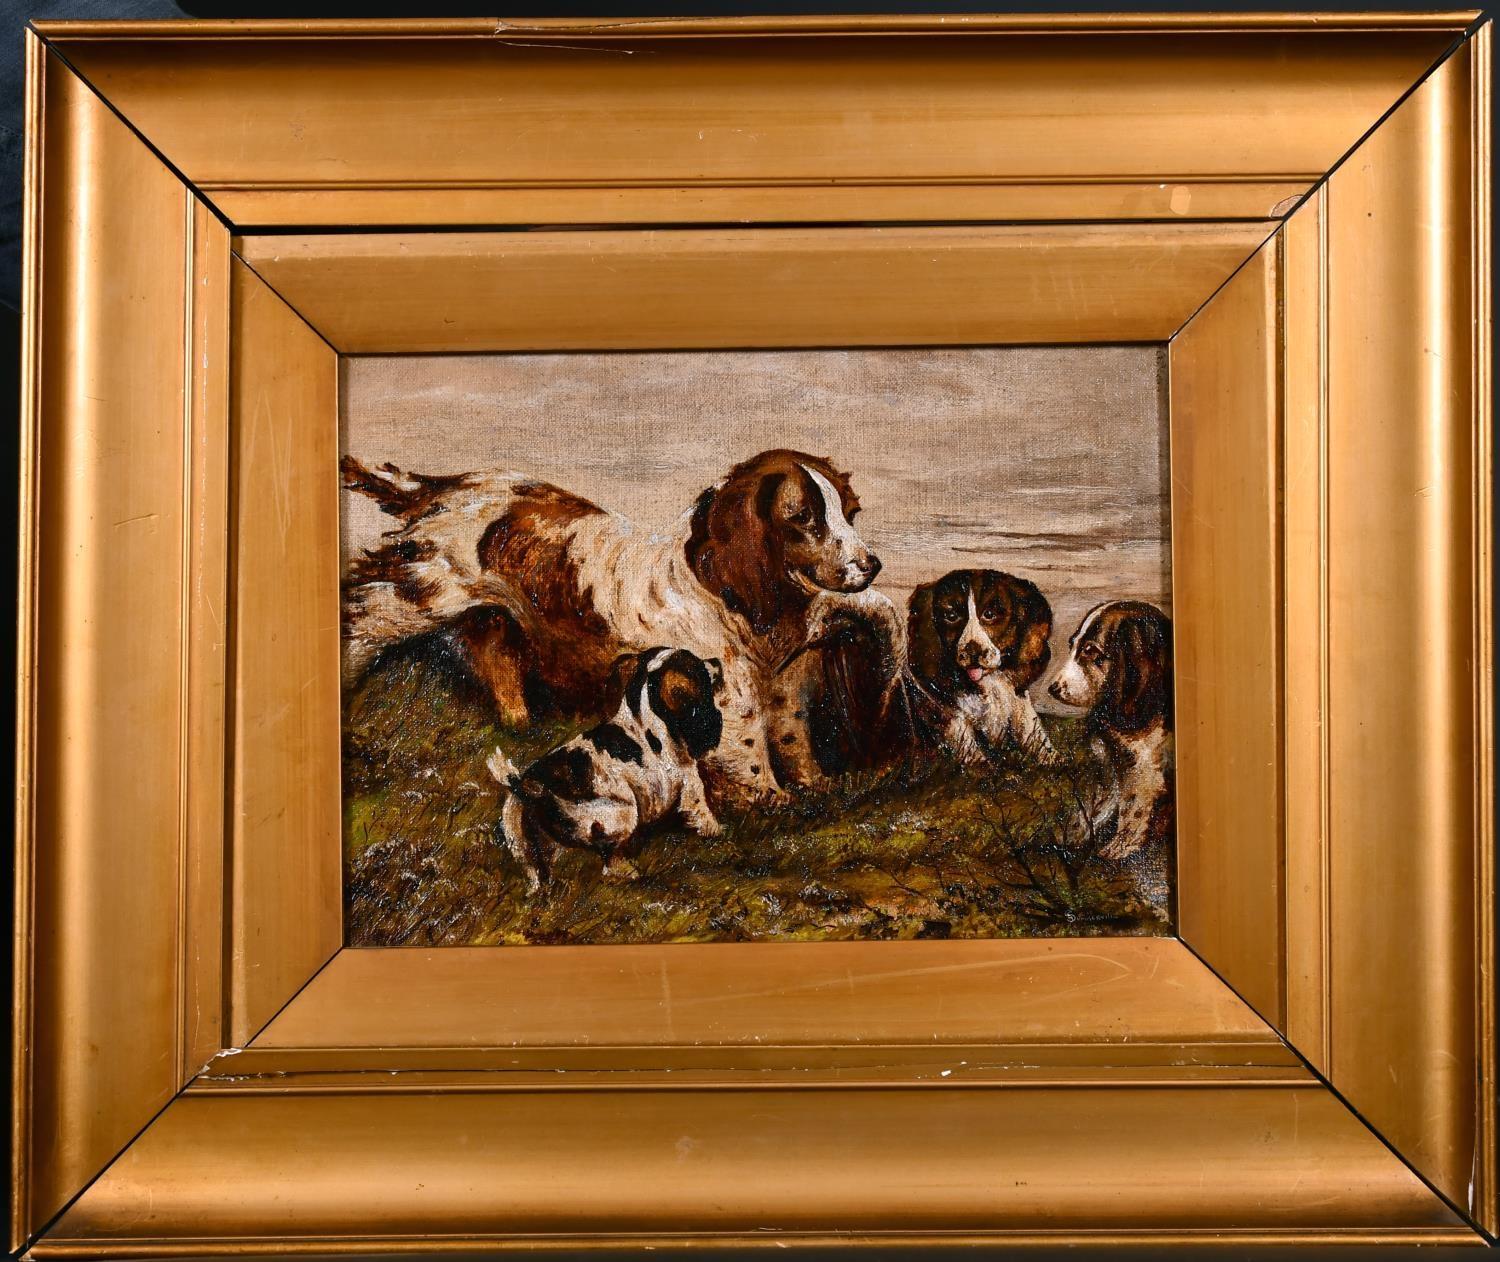 VICTORIAN SIGNED OIL PAINTING - SPANIEL DOG WITH HER PUPPIES IN LANDSCAPE - Painting by G. Summerville